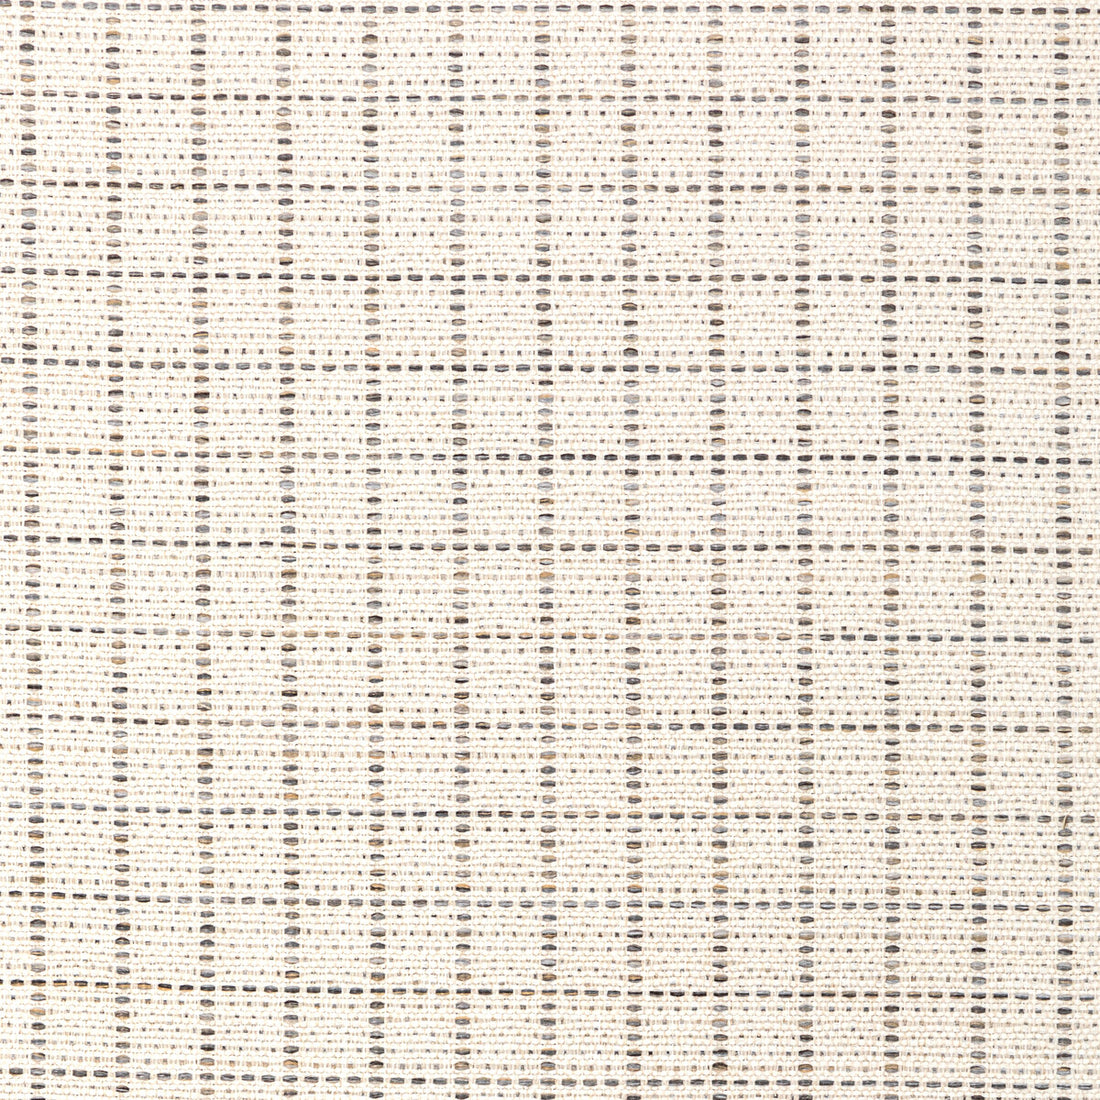 Kravet Smart fabric in 36304-11 color - pattern 36304.11.0 - by Kravet Smart in the Performance Crypton Home collection